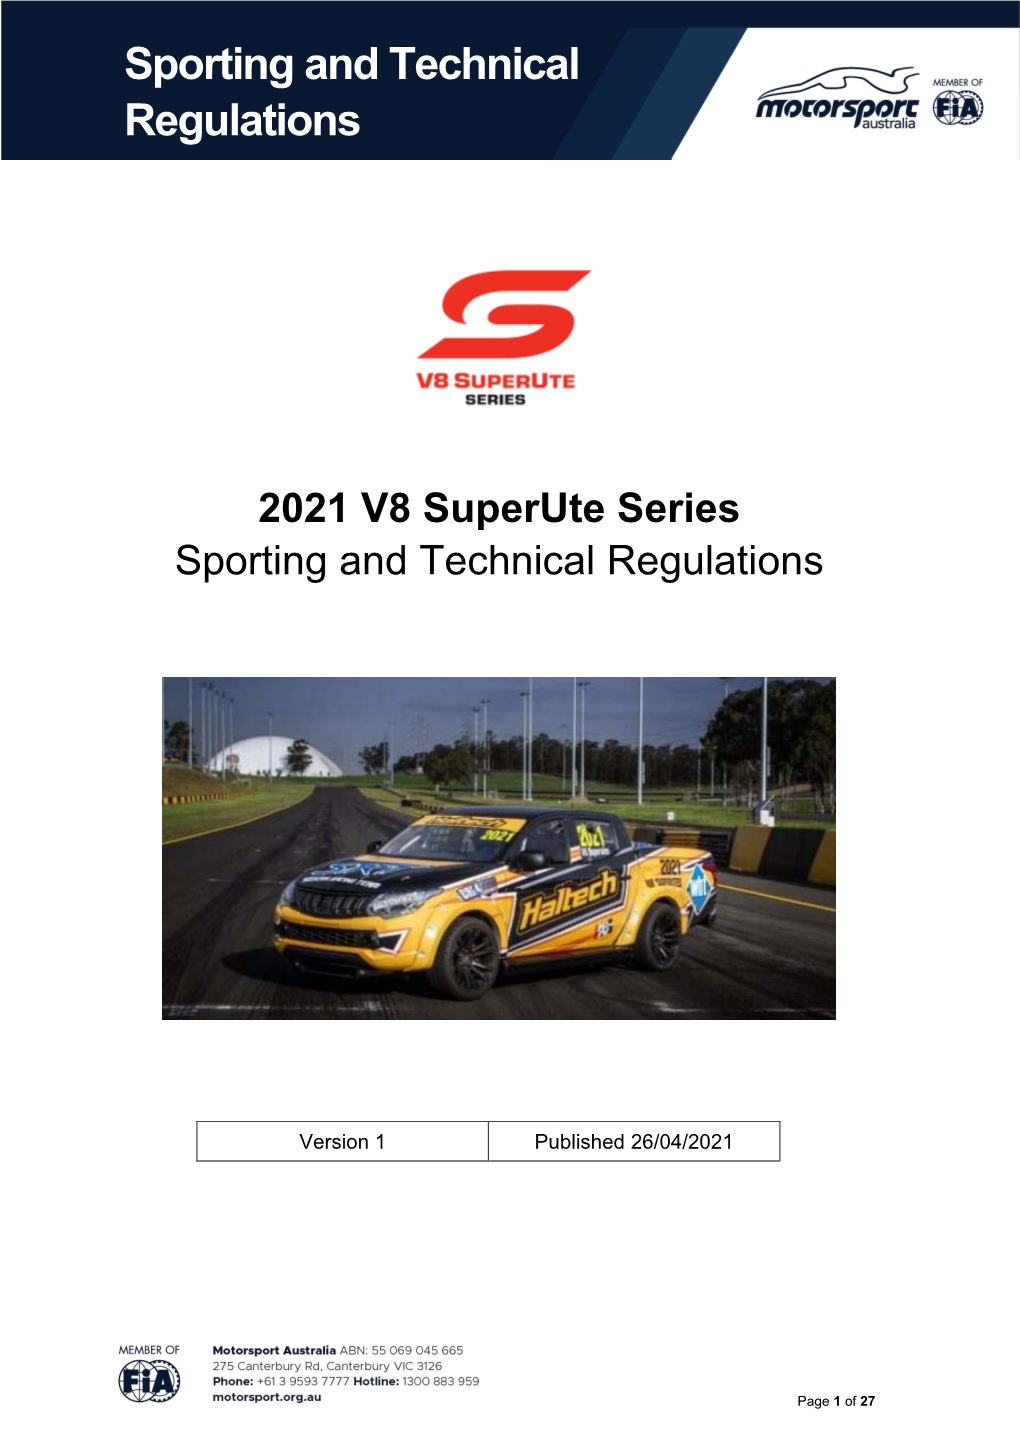 2021 V8 Superute Series Sporting and Technical Regulations